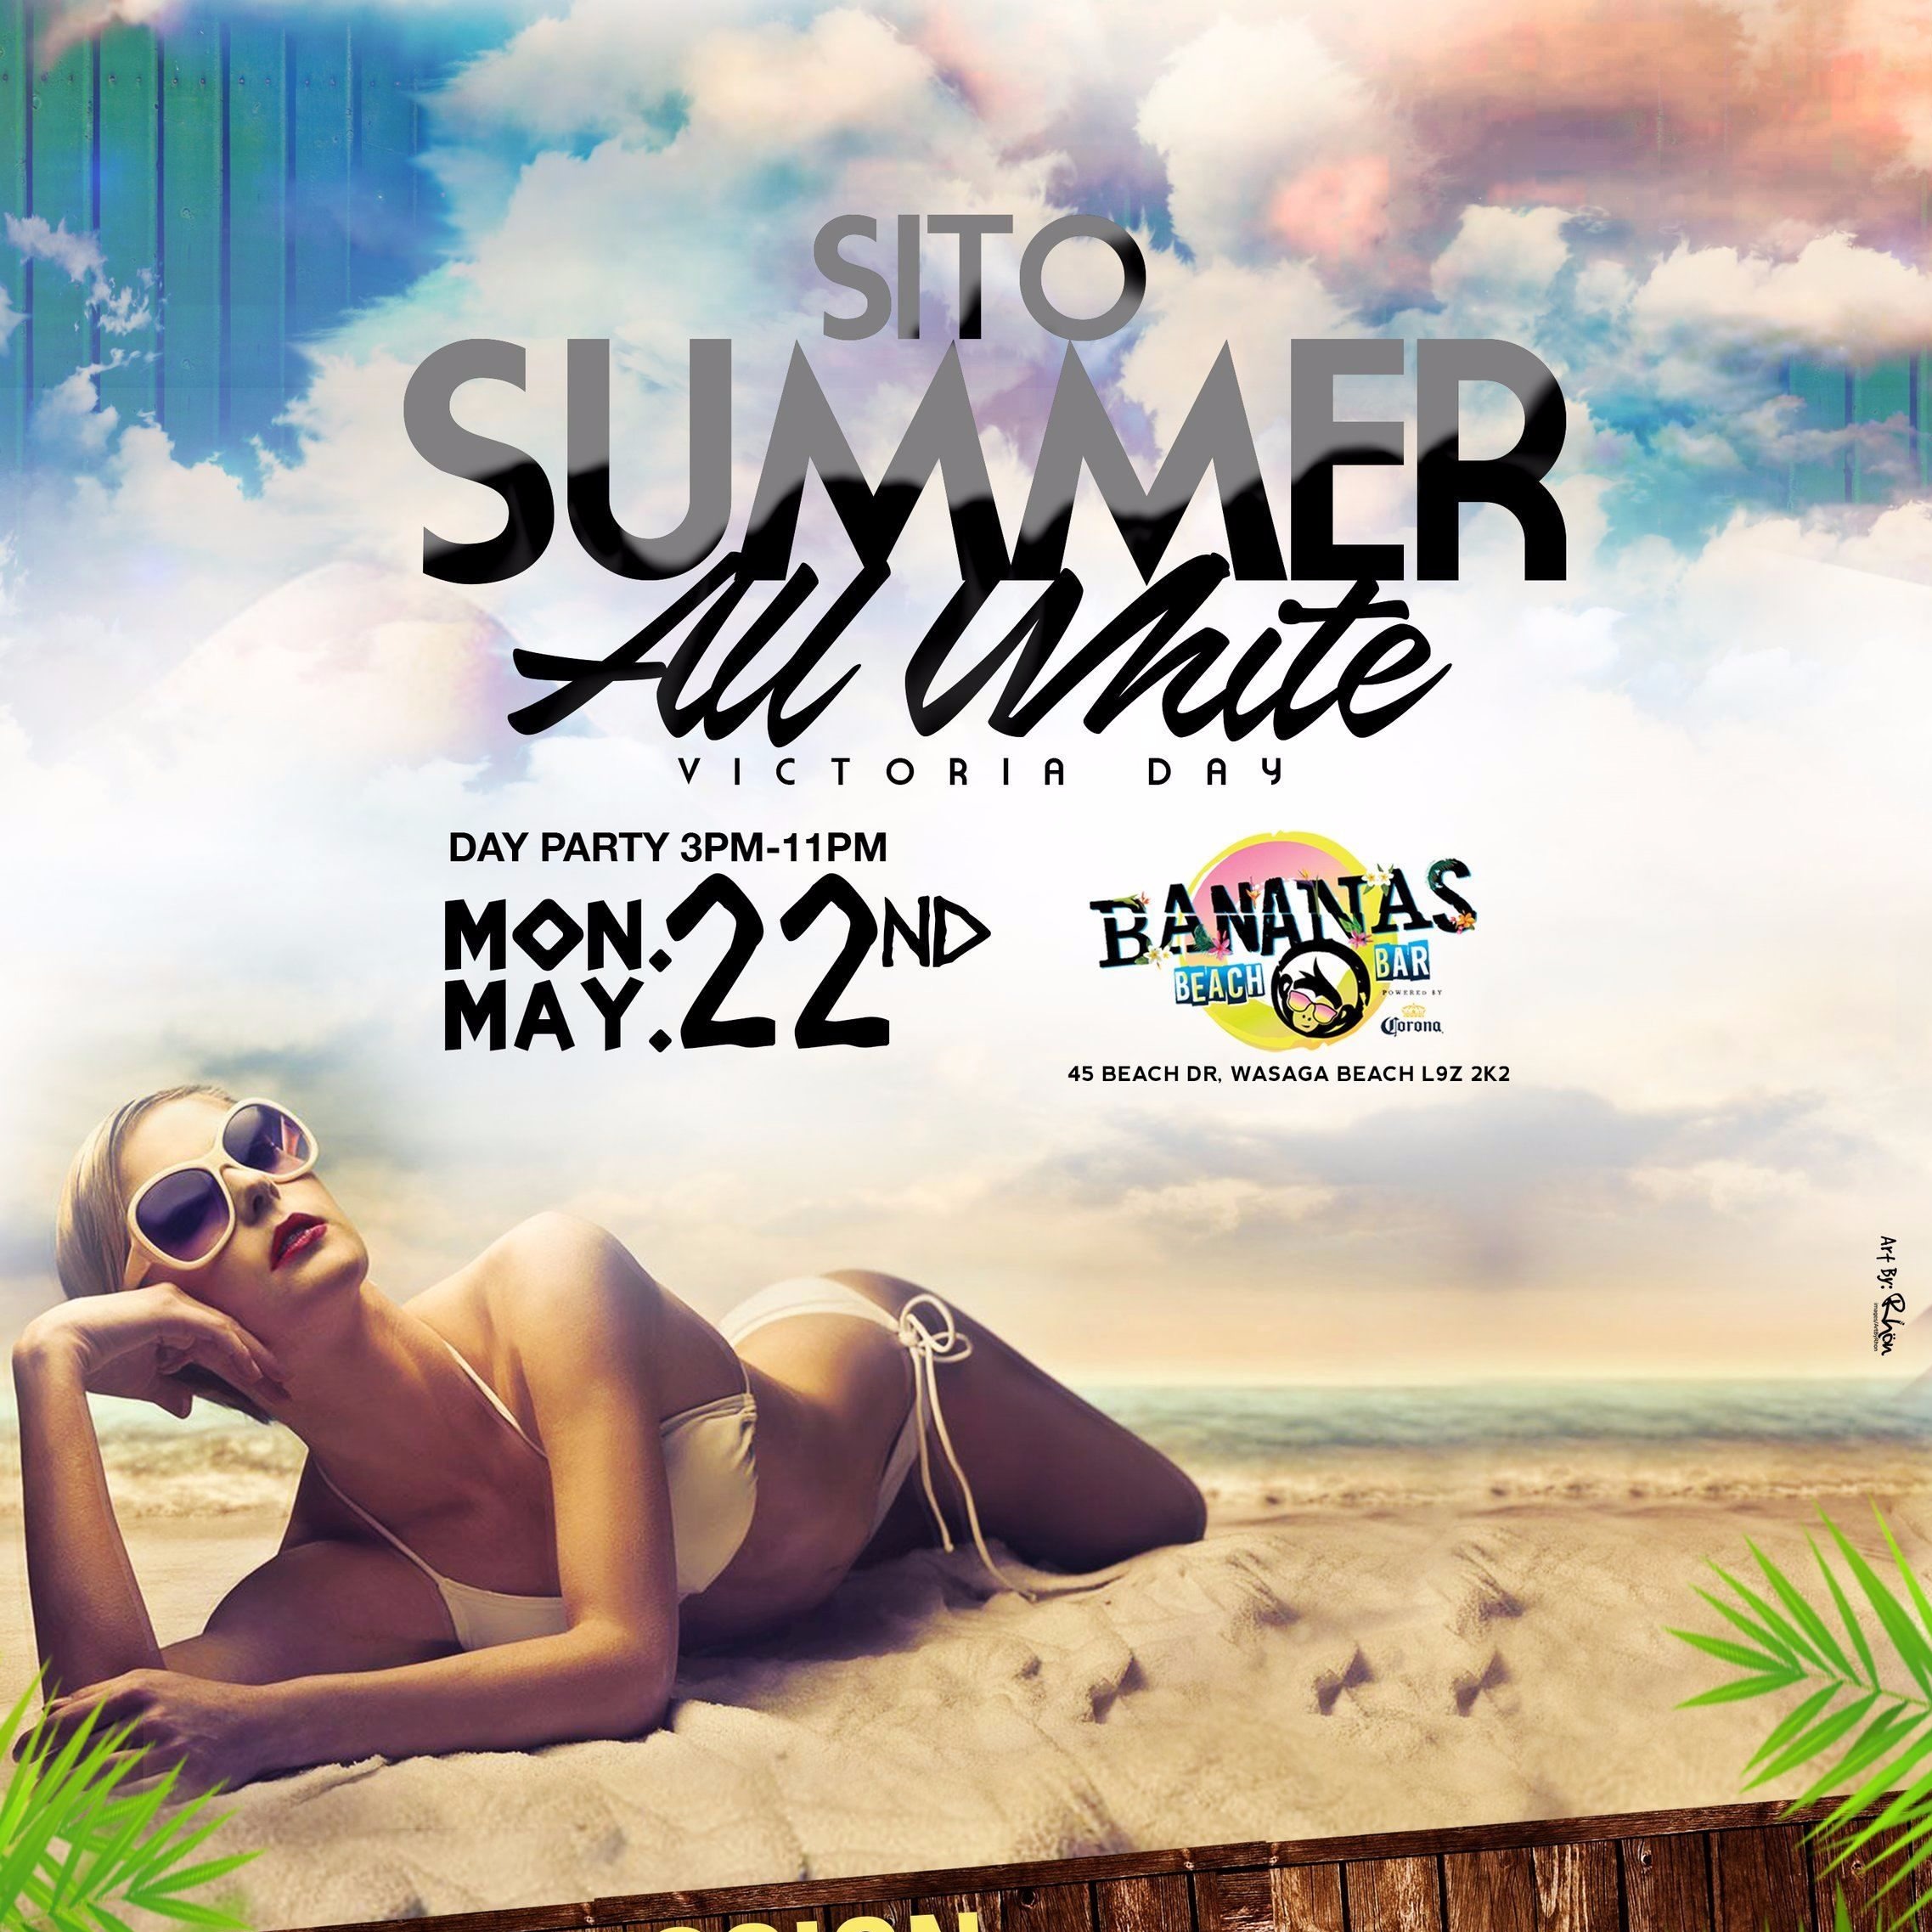 The Sito Summer All White 